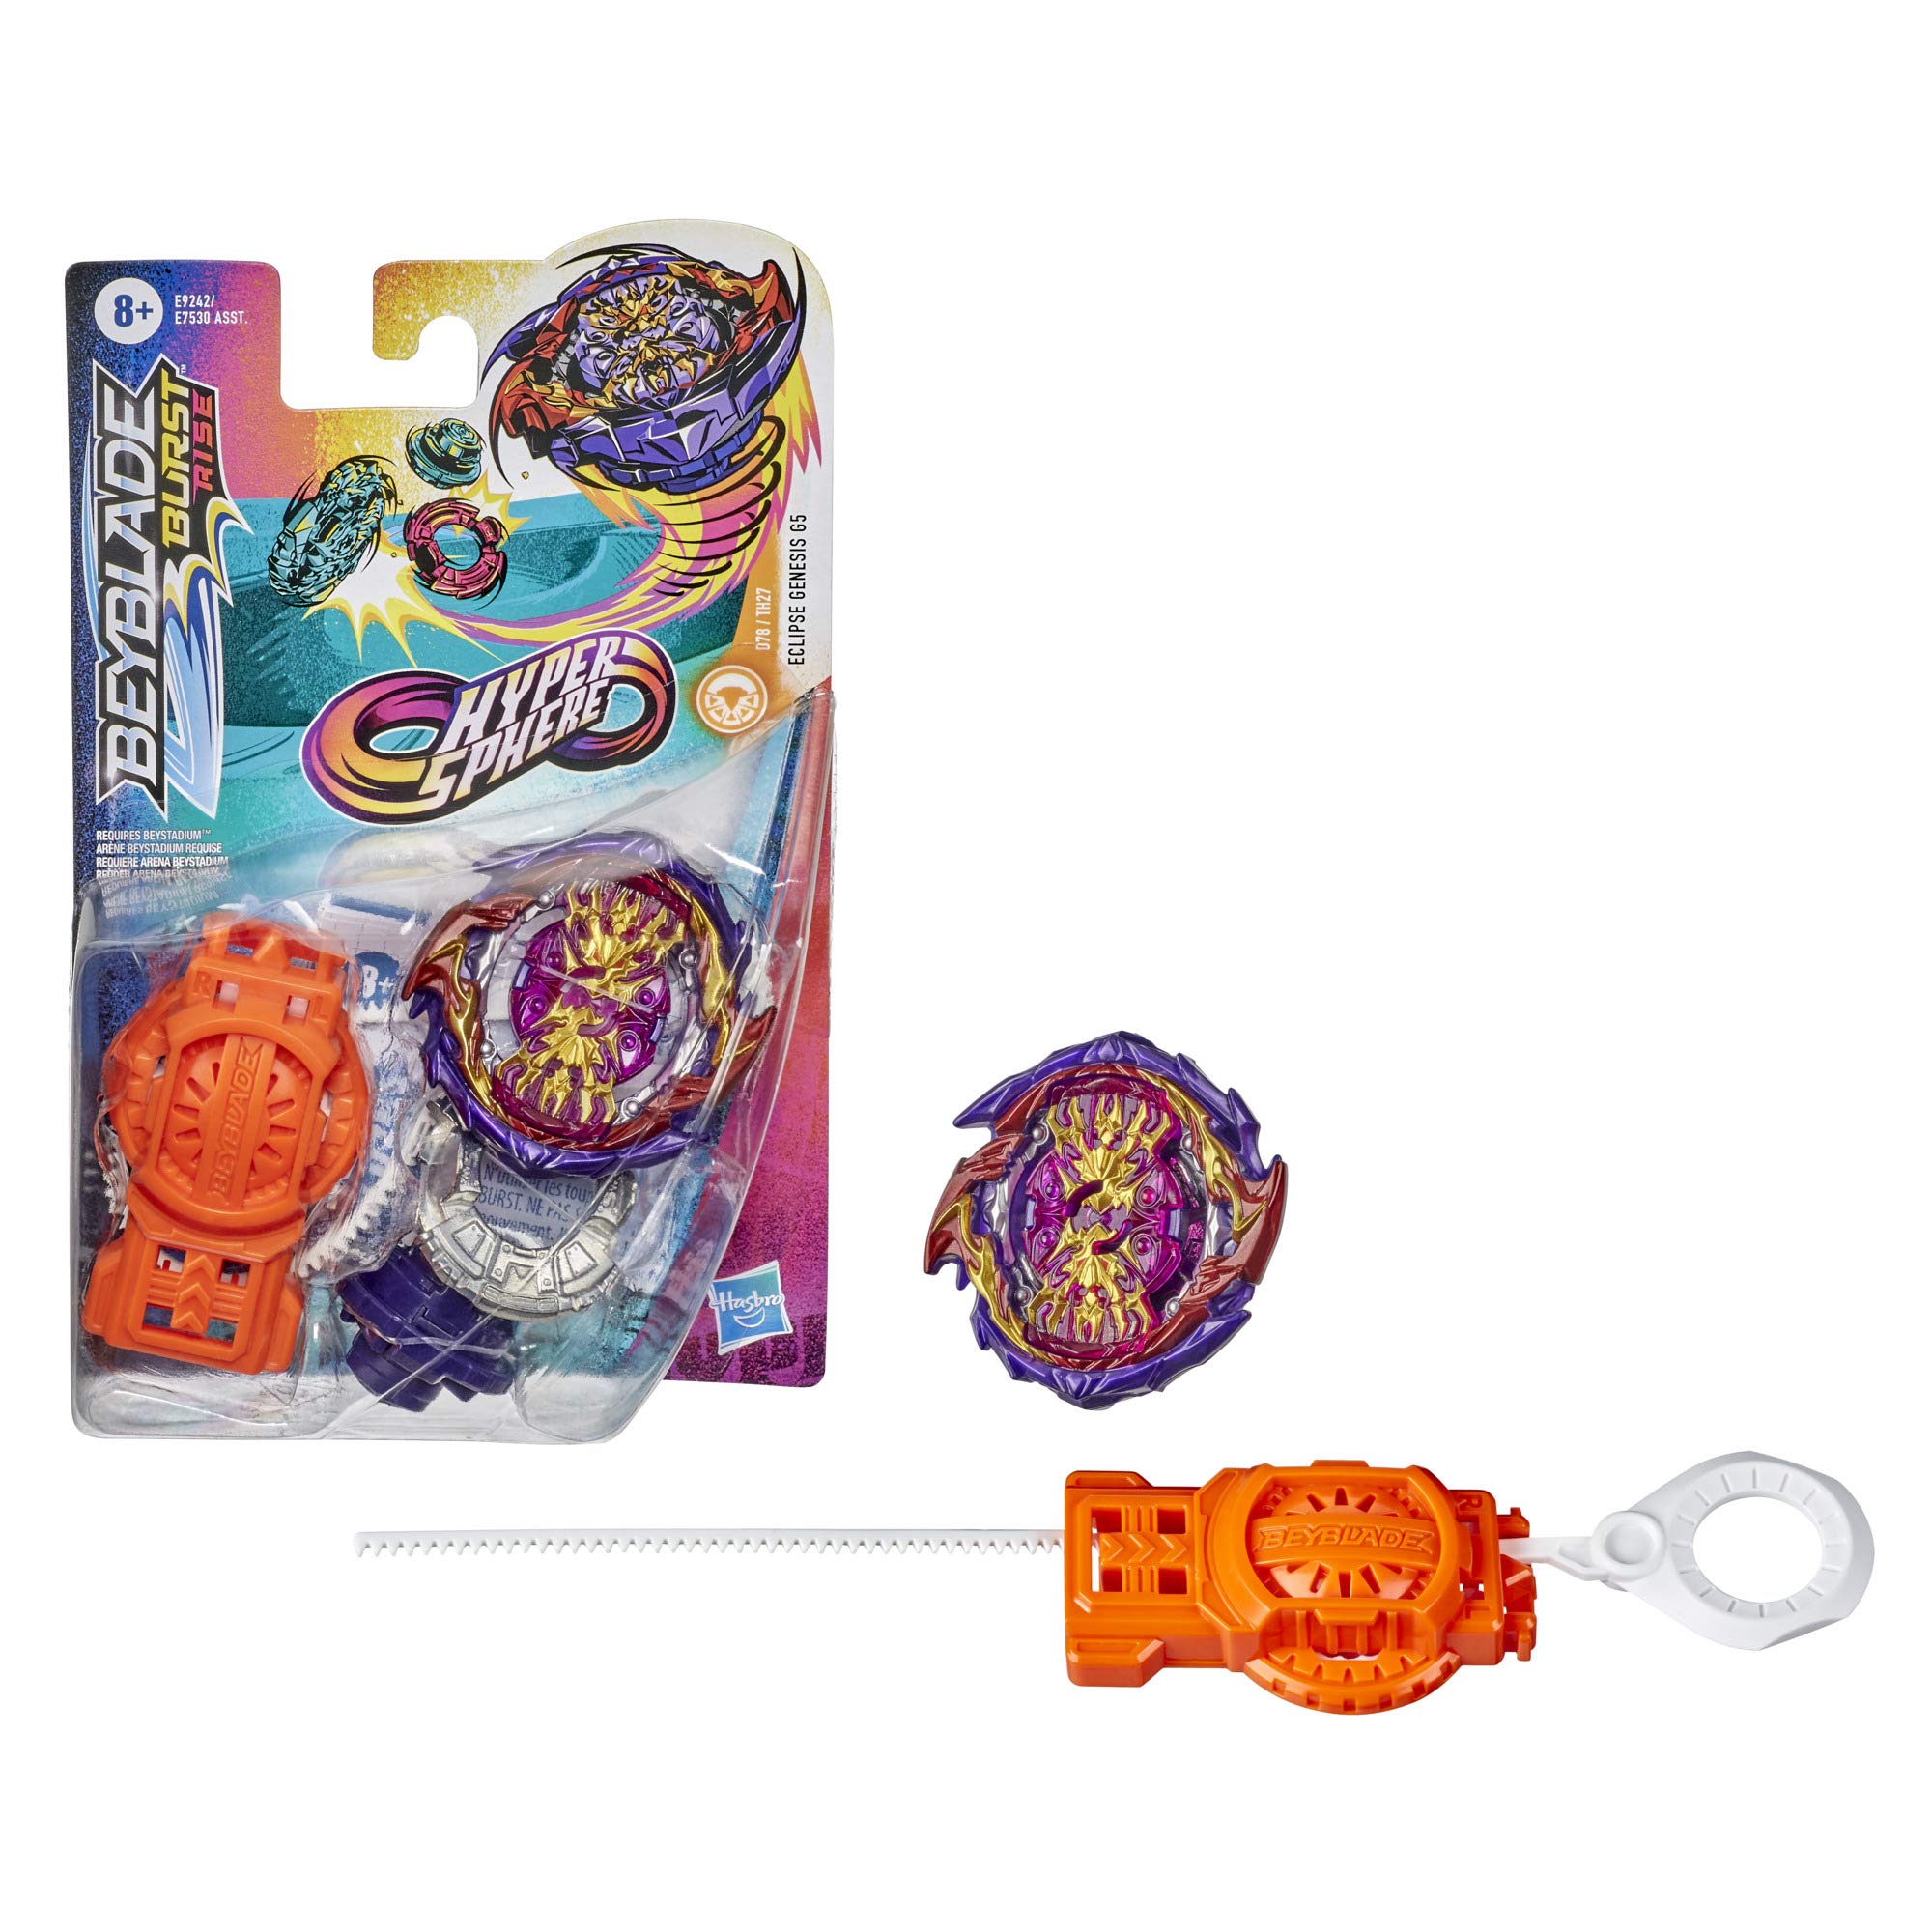 BEYBLADE Burst Rise Hypersphere Eclipse Genesis G5 Starter Pack -- Stamina Type Battling Game Top and Launcher, Toys Ages 8 and Up